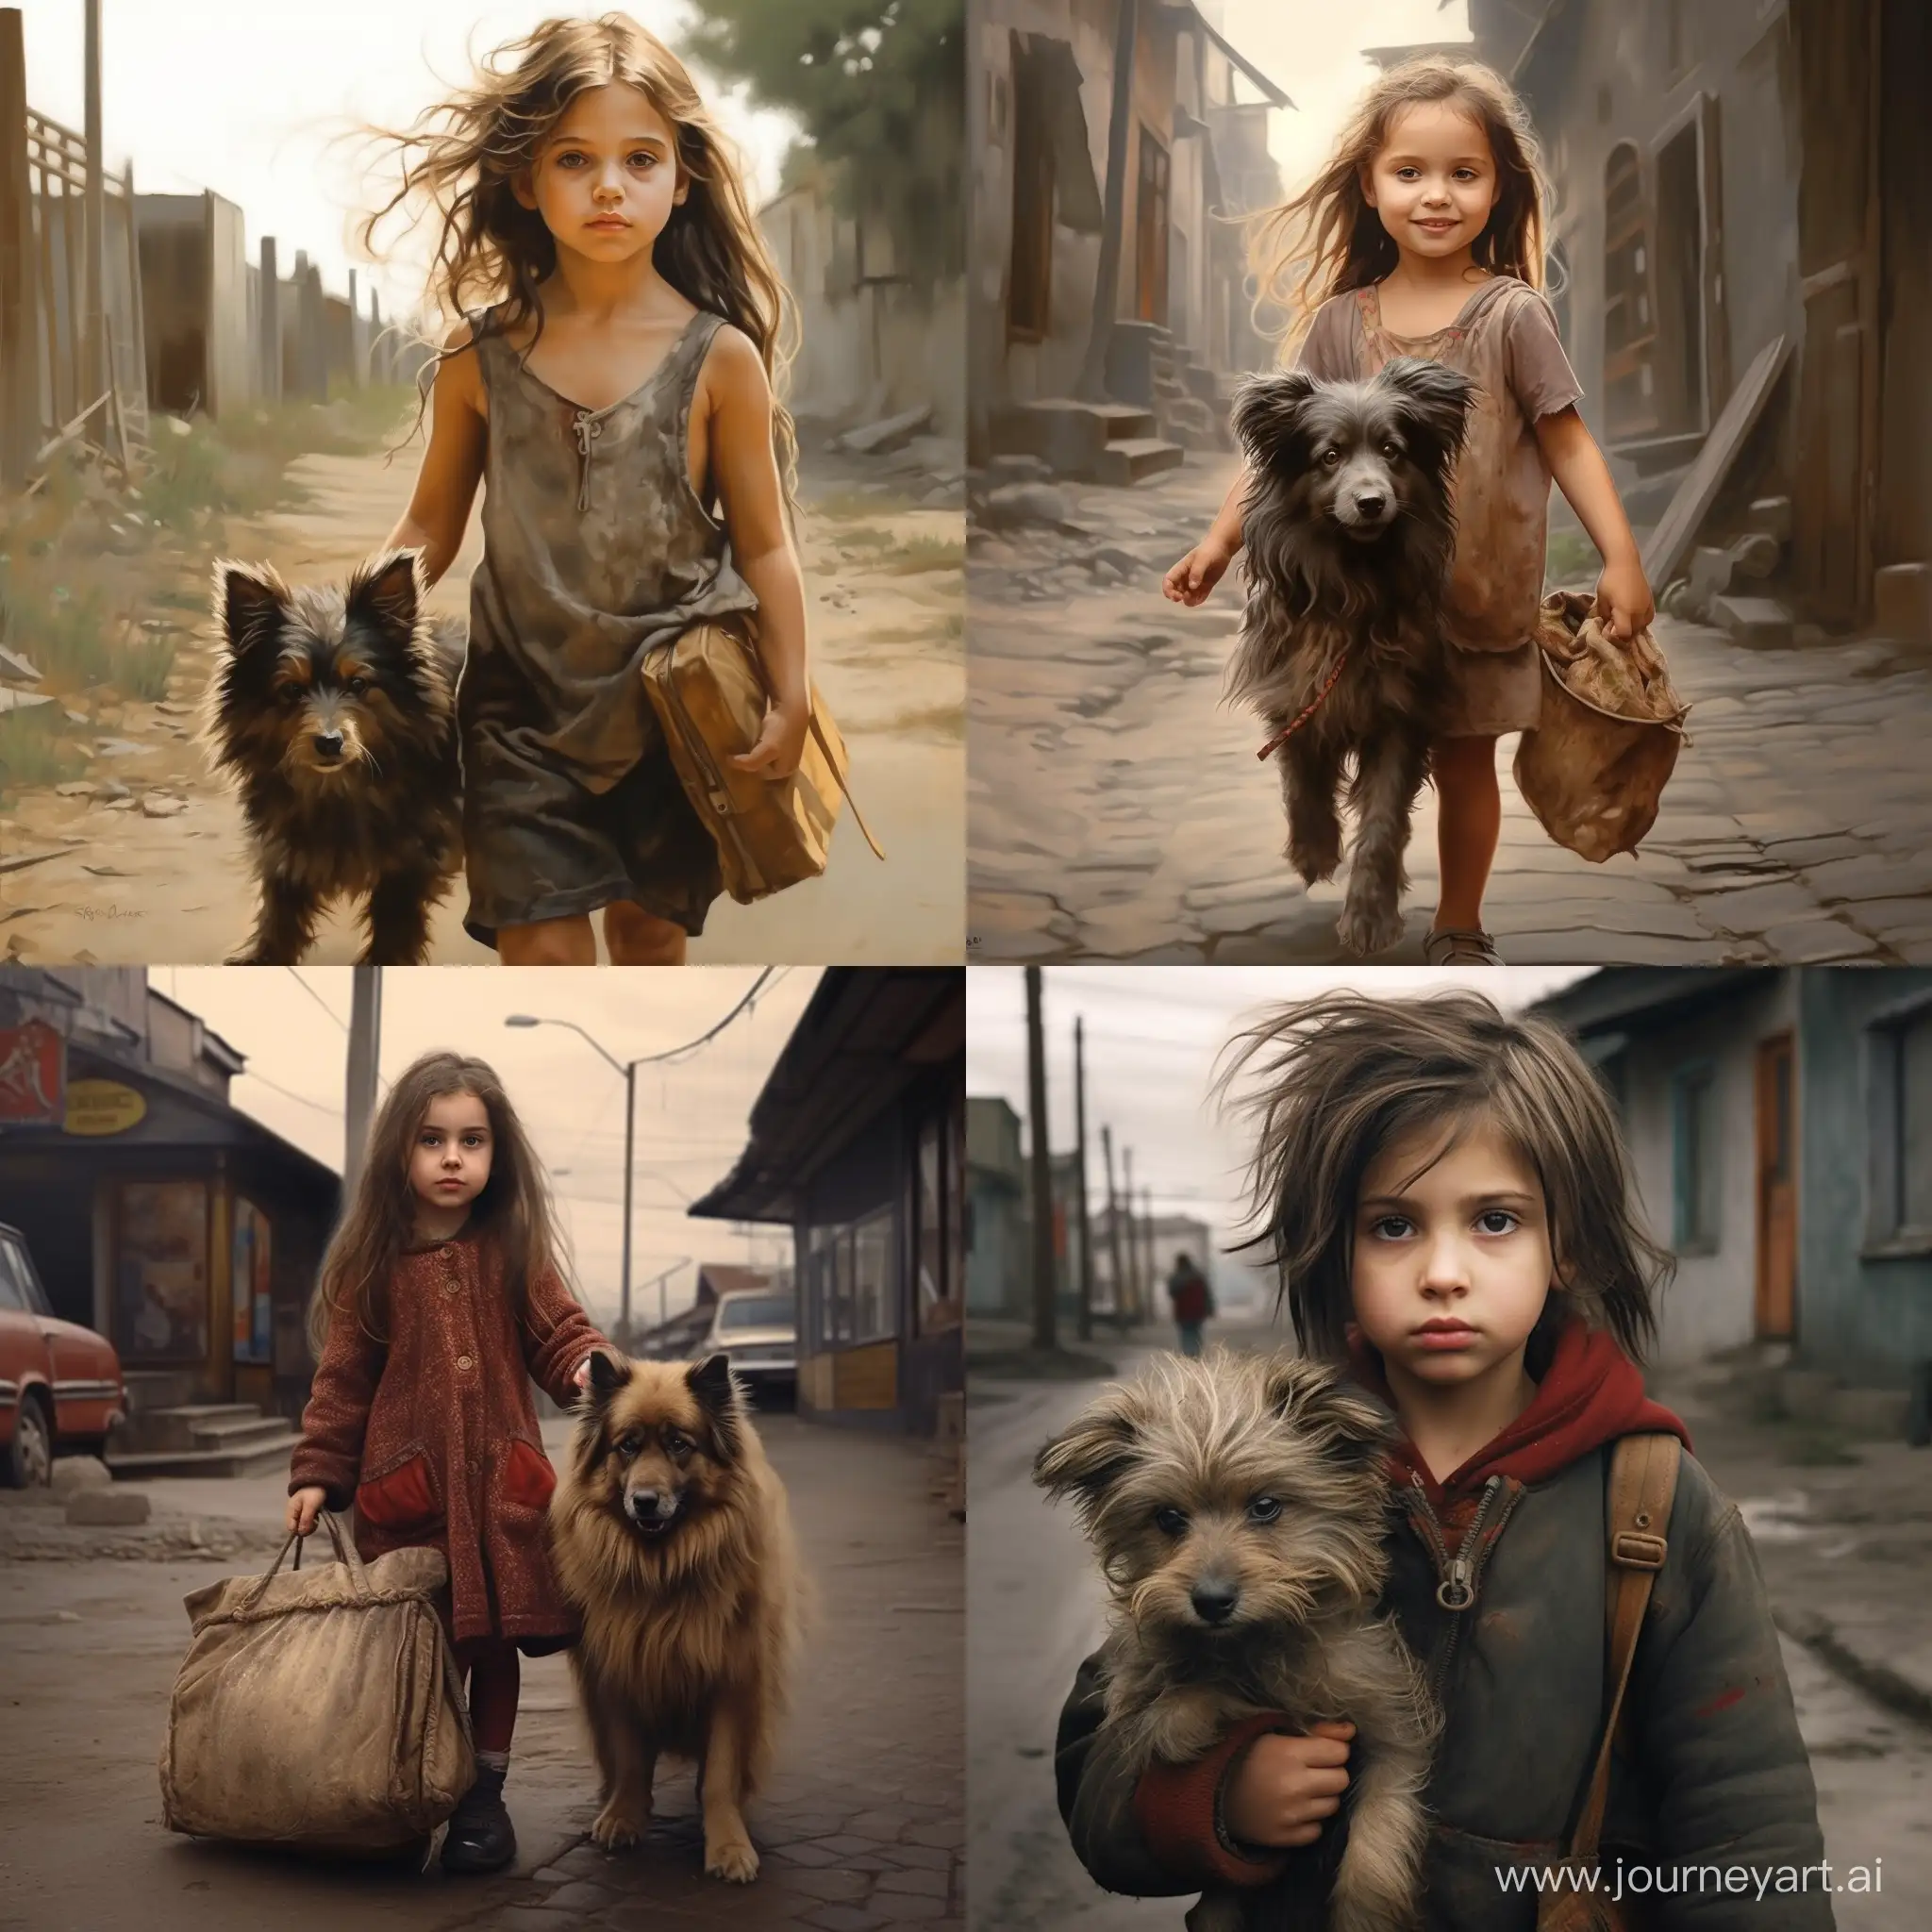 A Slovak girl rushed to buy a dog so that a family with a small child would not come to visit them. Photorealistic.